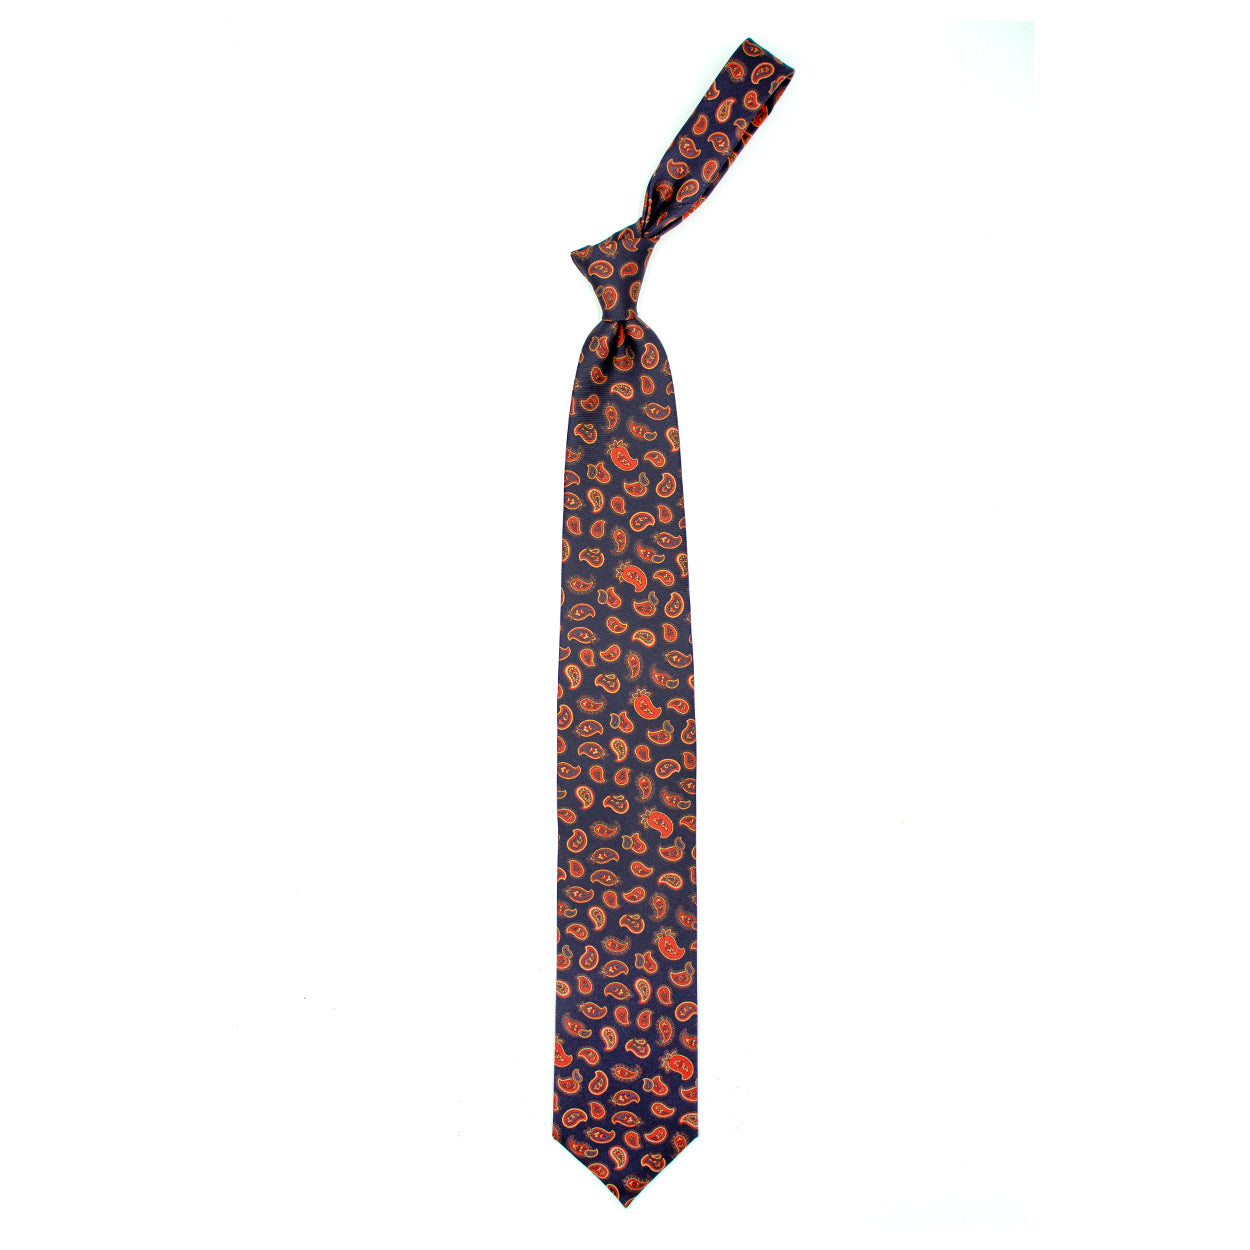 Blue tie with orange, blue and yellow paisleys